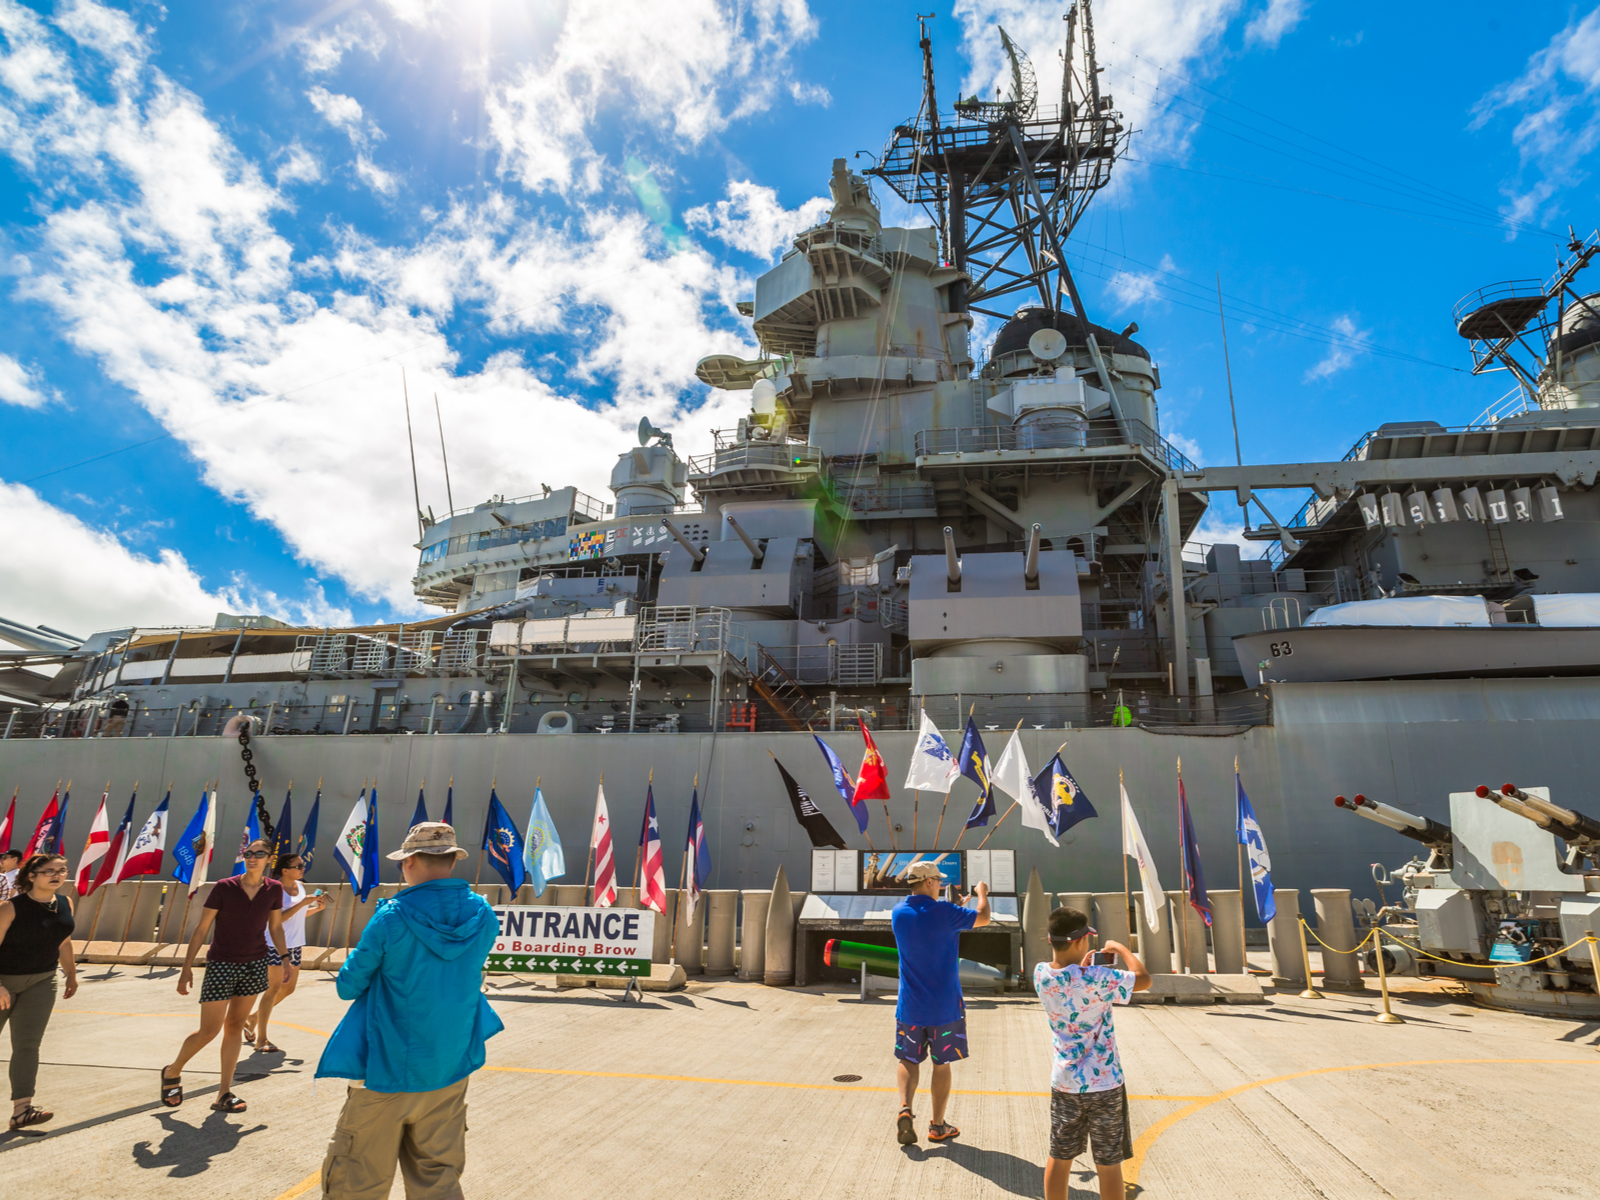 Several tourists taking pictures of the historic USS Missouri BB-63 warship at Pearl Harbor National Memorial, one of the best things to do in Oahu, with many flags lined up at the front